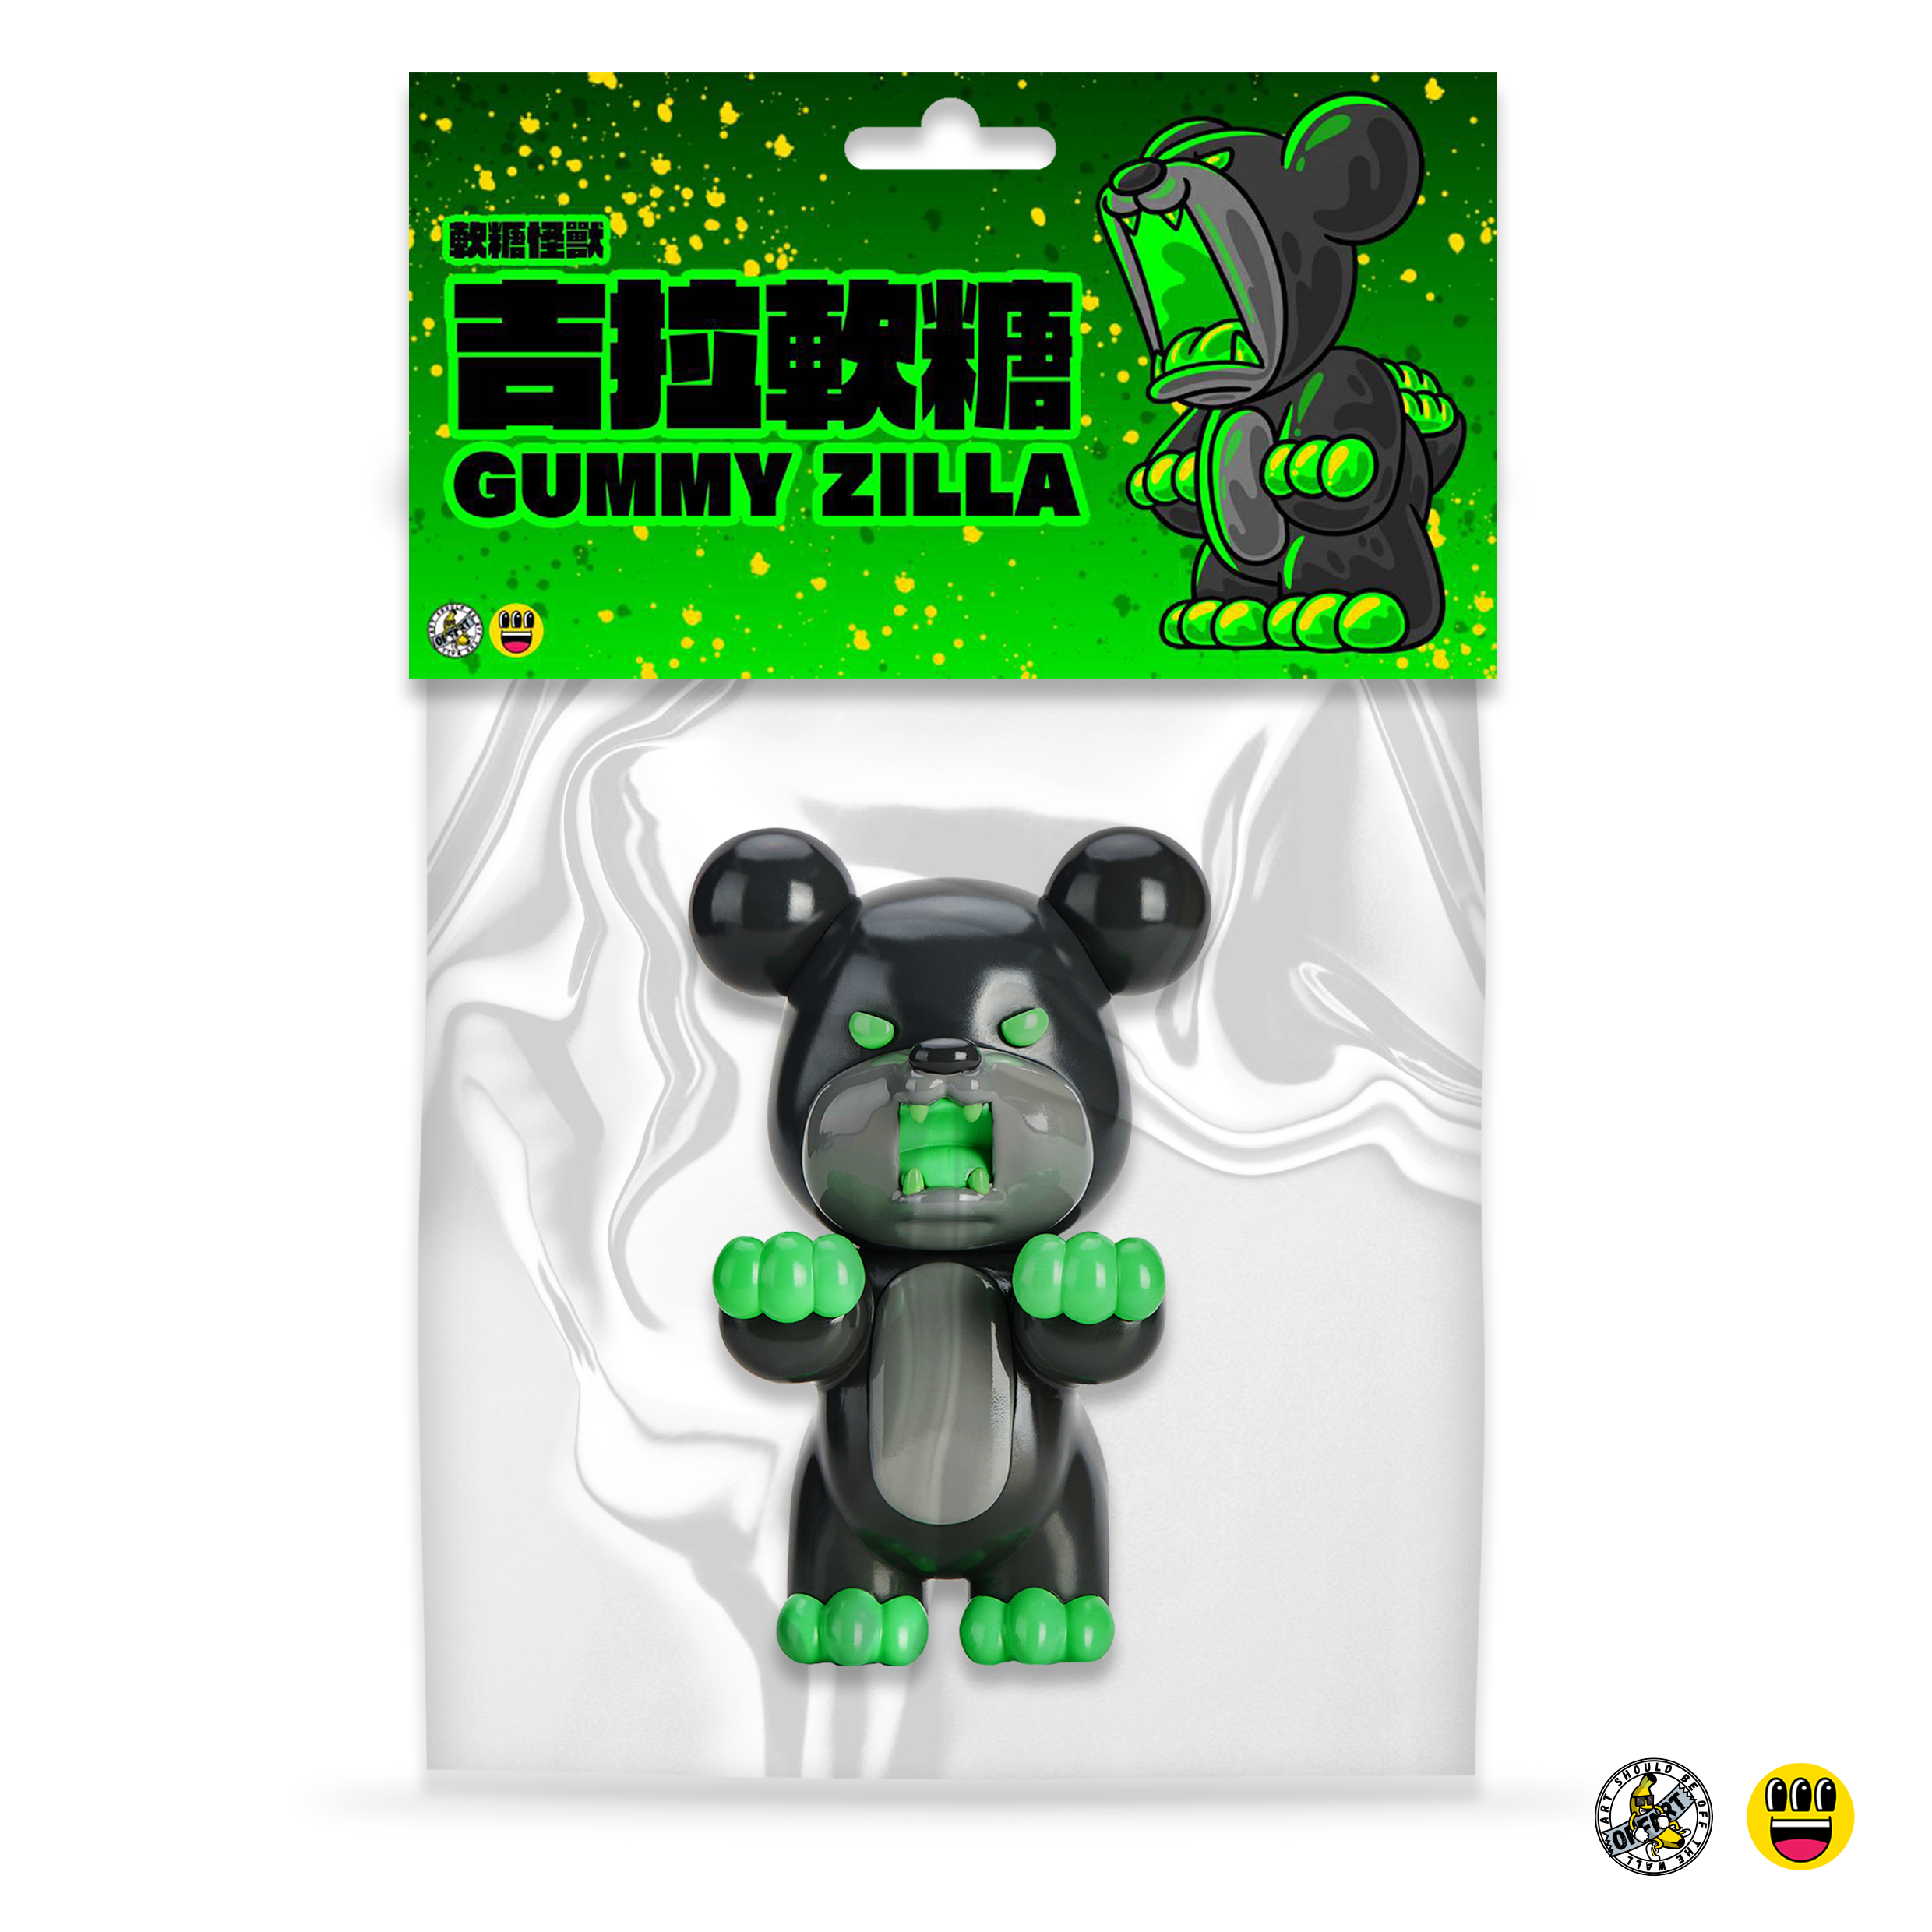 A plastic toy bear and cartoon dog in package, with a green sign and bubble gum.